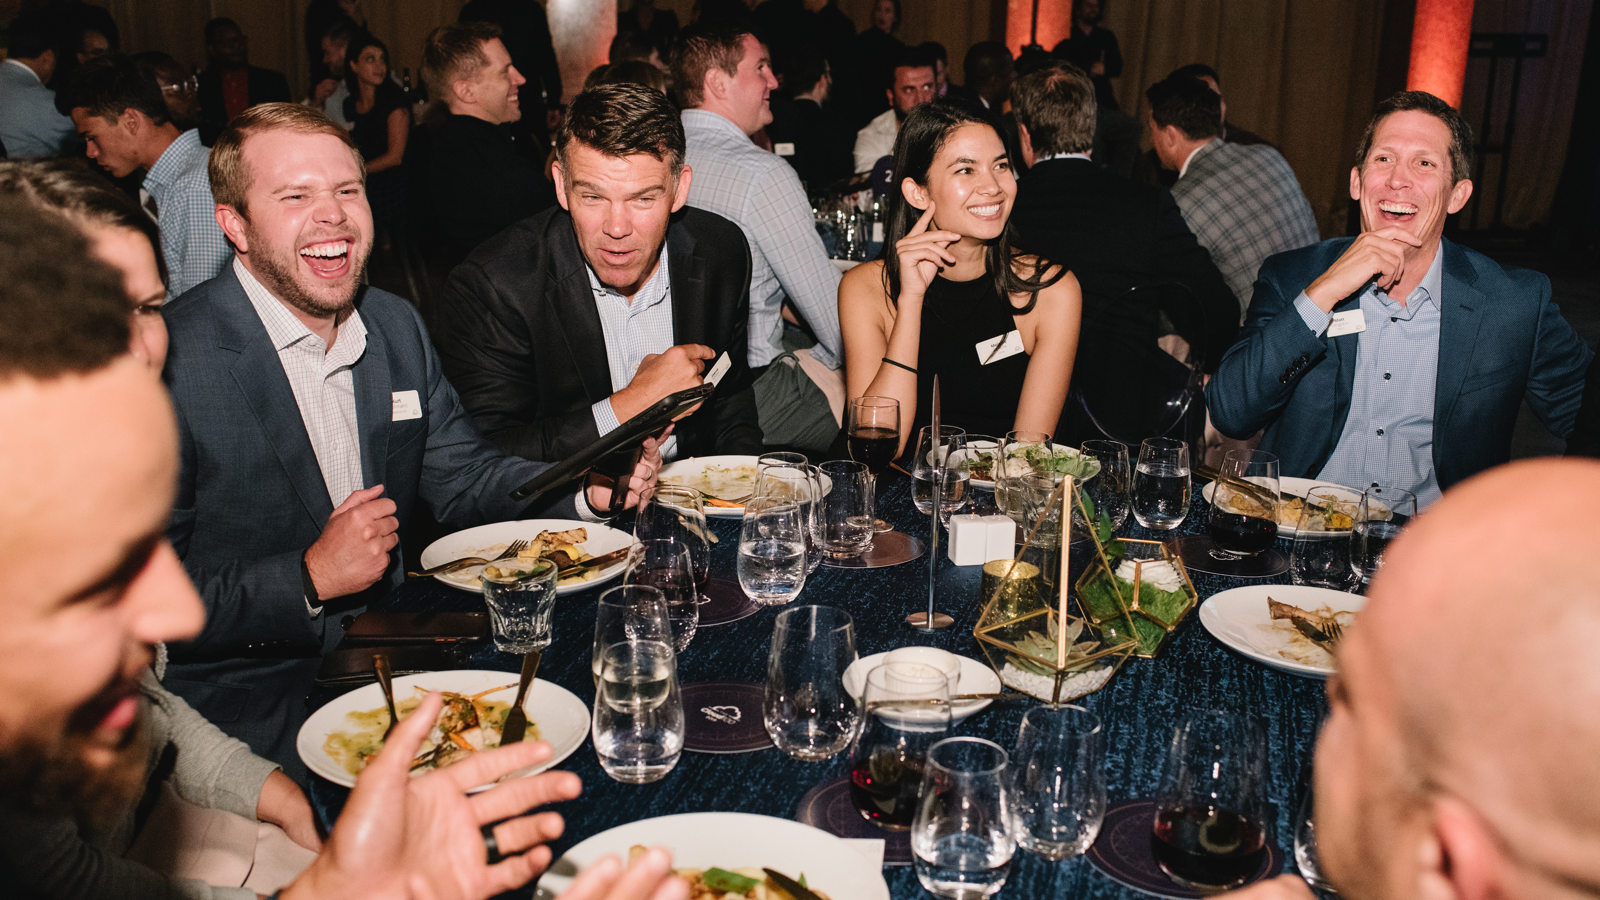 (Pictured: Stephen Curry, Jeff Lawson of Twilio, Matt Langdon of Sketch, Melanie Perkins of Canva, Steve Miller of Bank of America Merrill Lynch, Kurt Rathmann of ScaleFactor, and Rachel Carlson of Guild Education at The 2019 Cloud 100 Celebration)